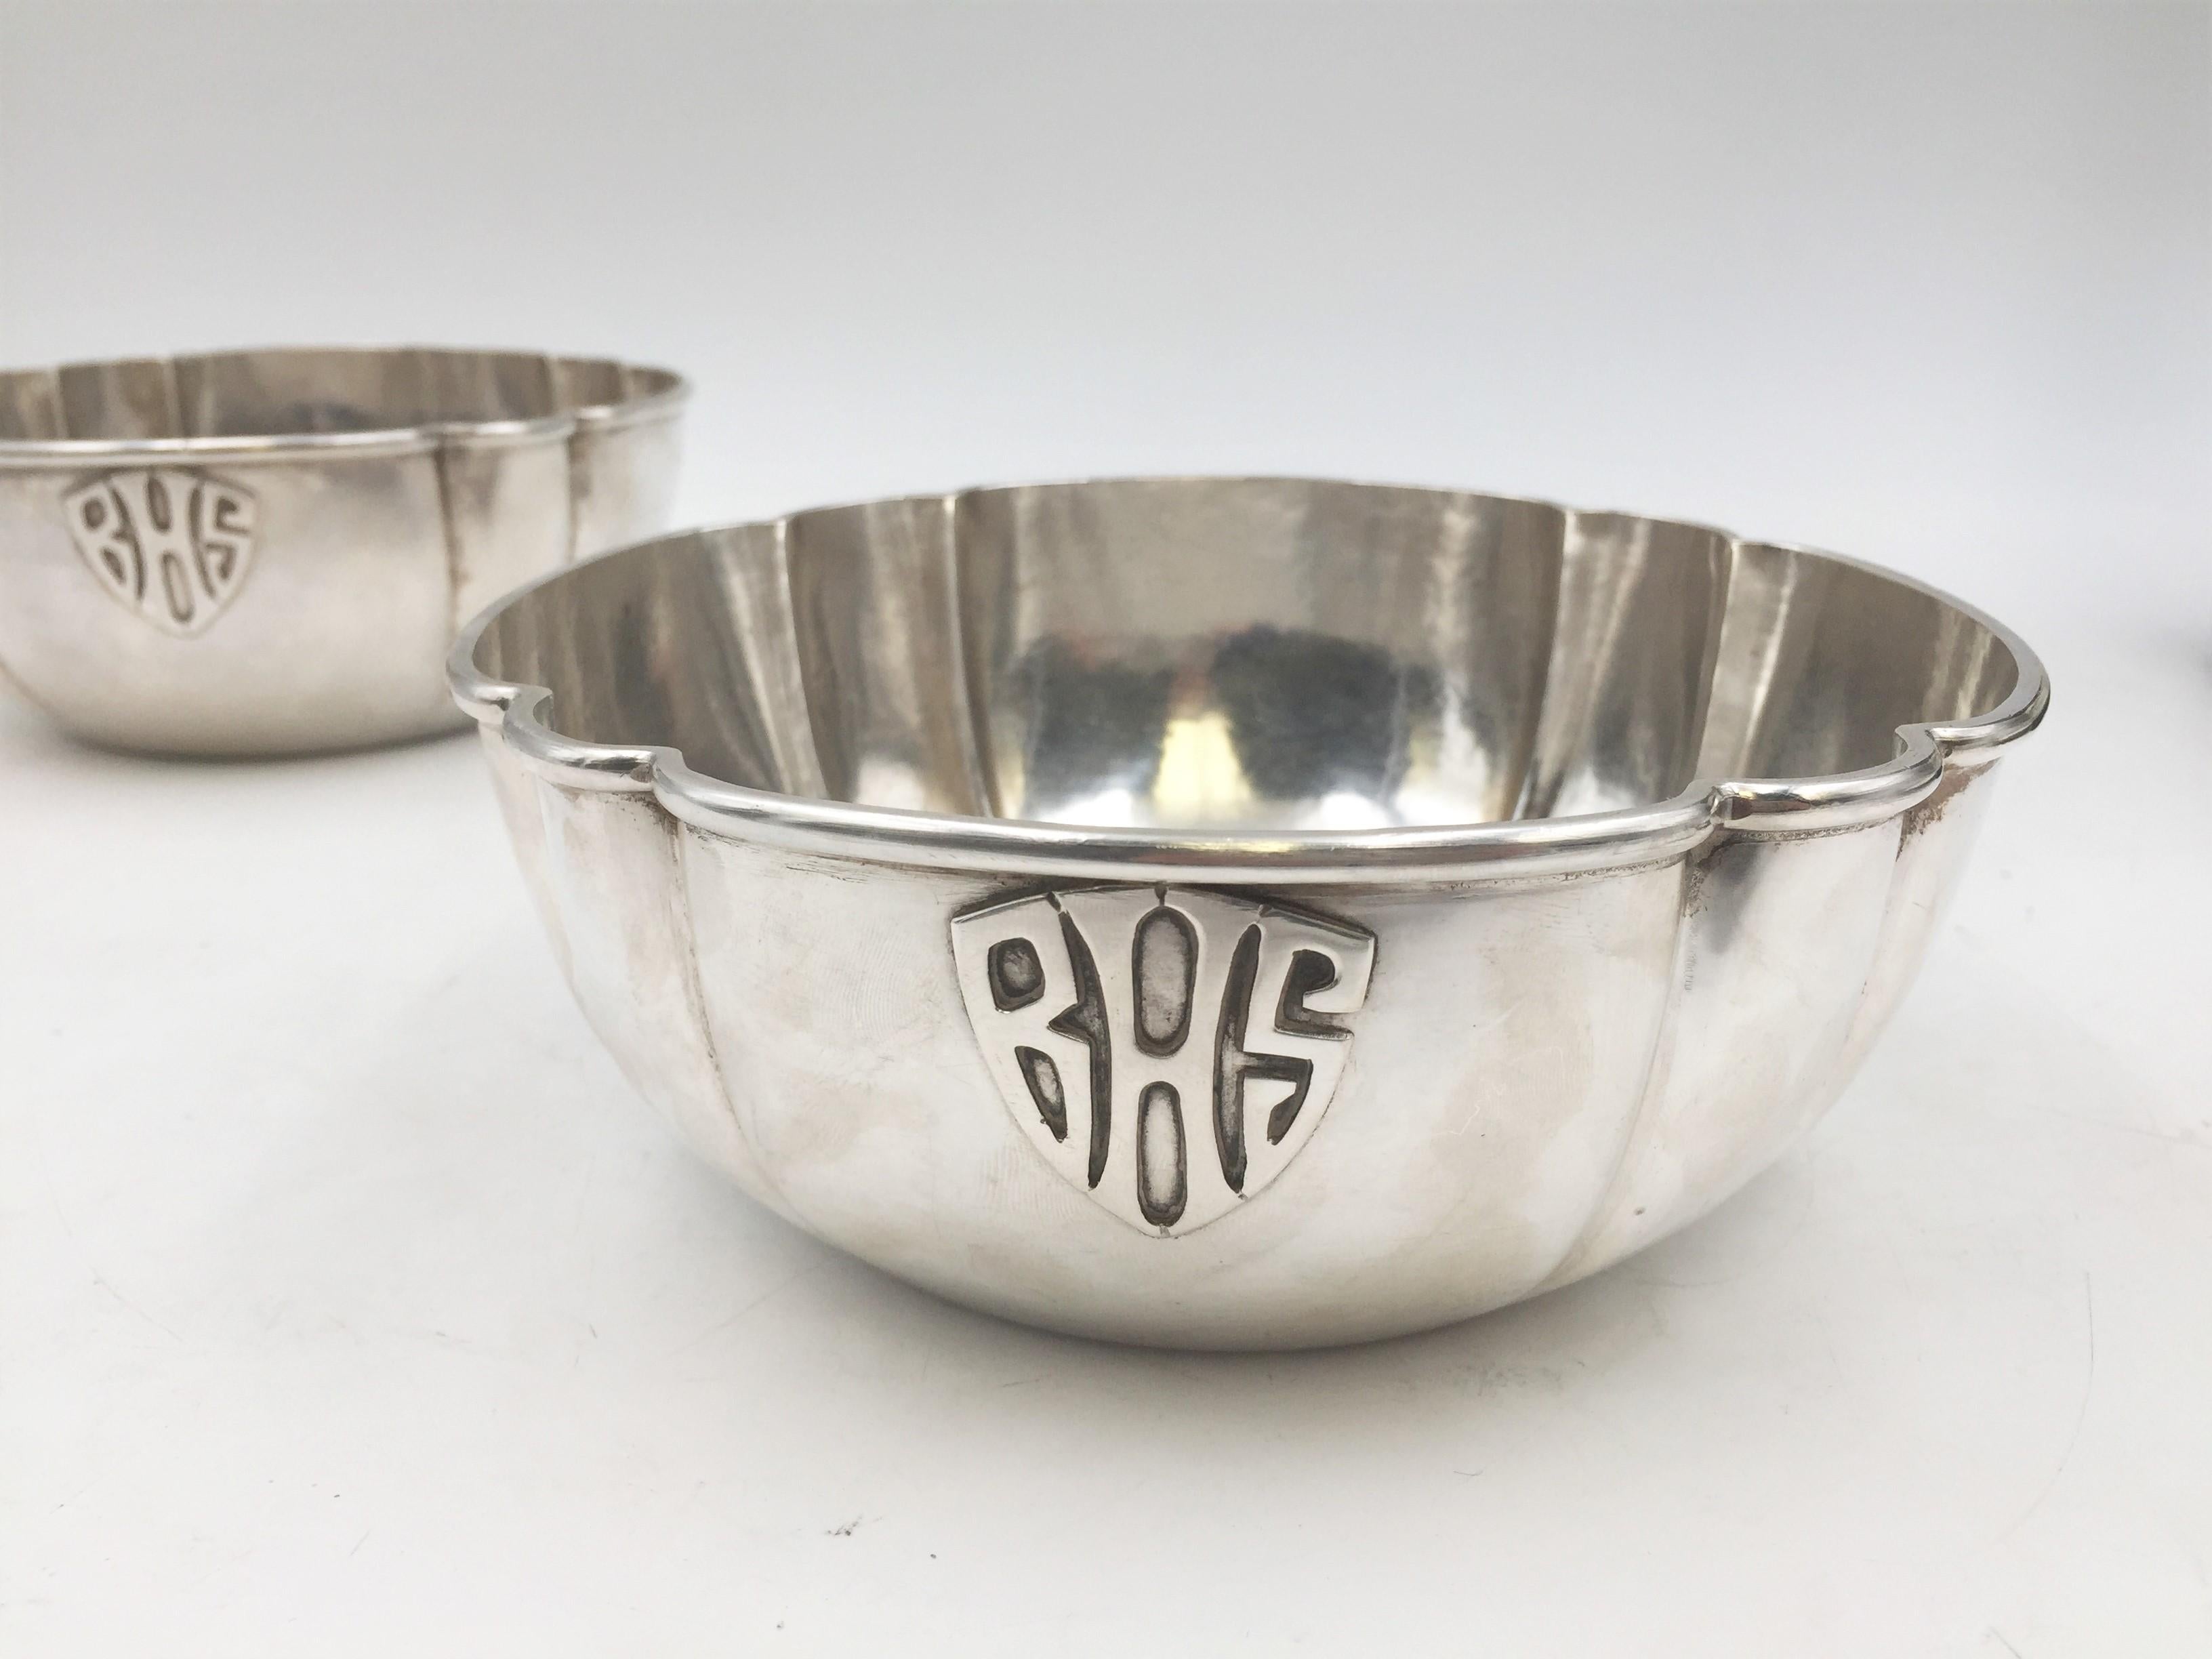 Pair of F. Novick, American, 20th century, beautifully handwrought / hammered round sterling silver bowls in Arts & Crafts Style. Each measures 6 1/3'' in diameter by 2 1/2'' in height, weighs 10.2 ozt (20.4 ozt total), and bears hallmarks and a